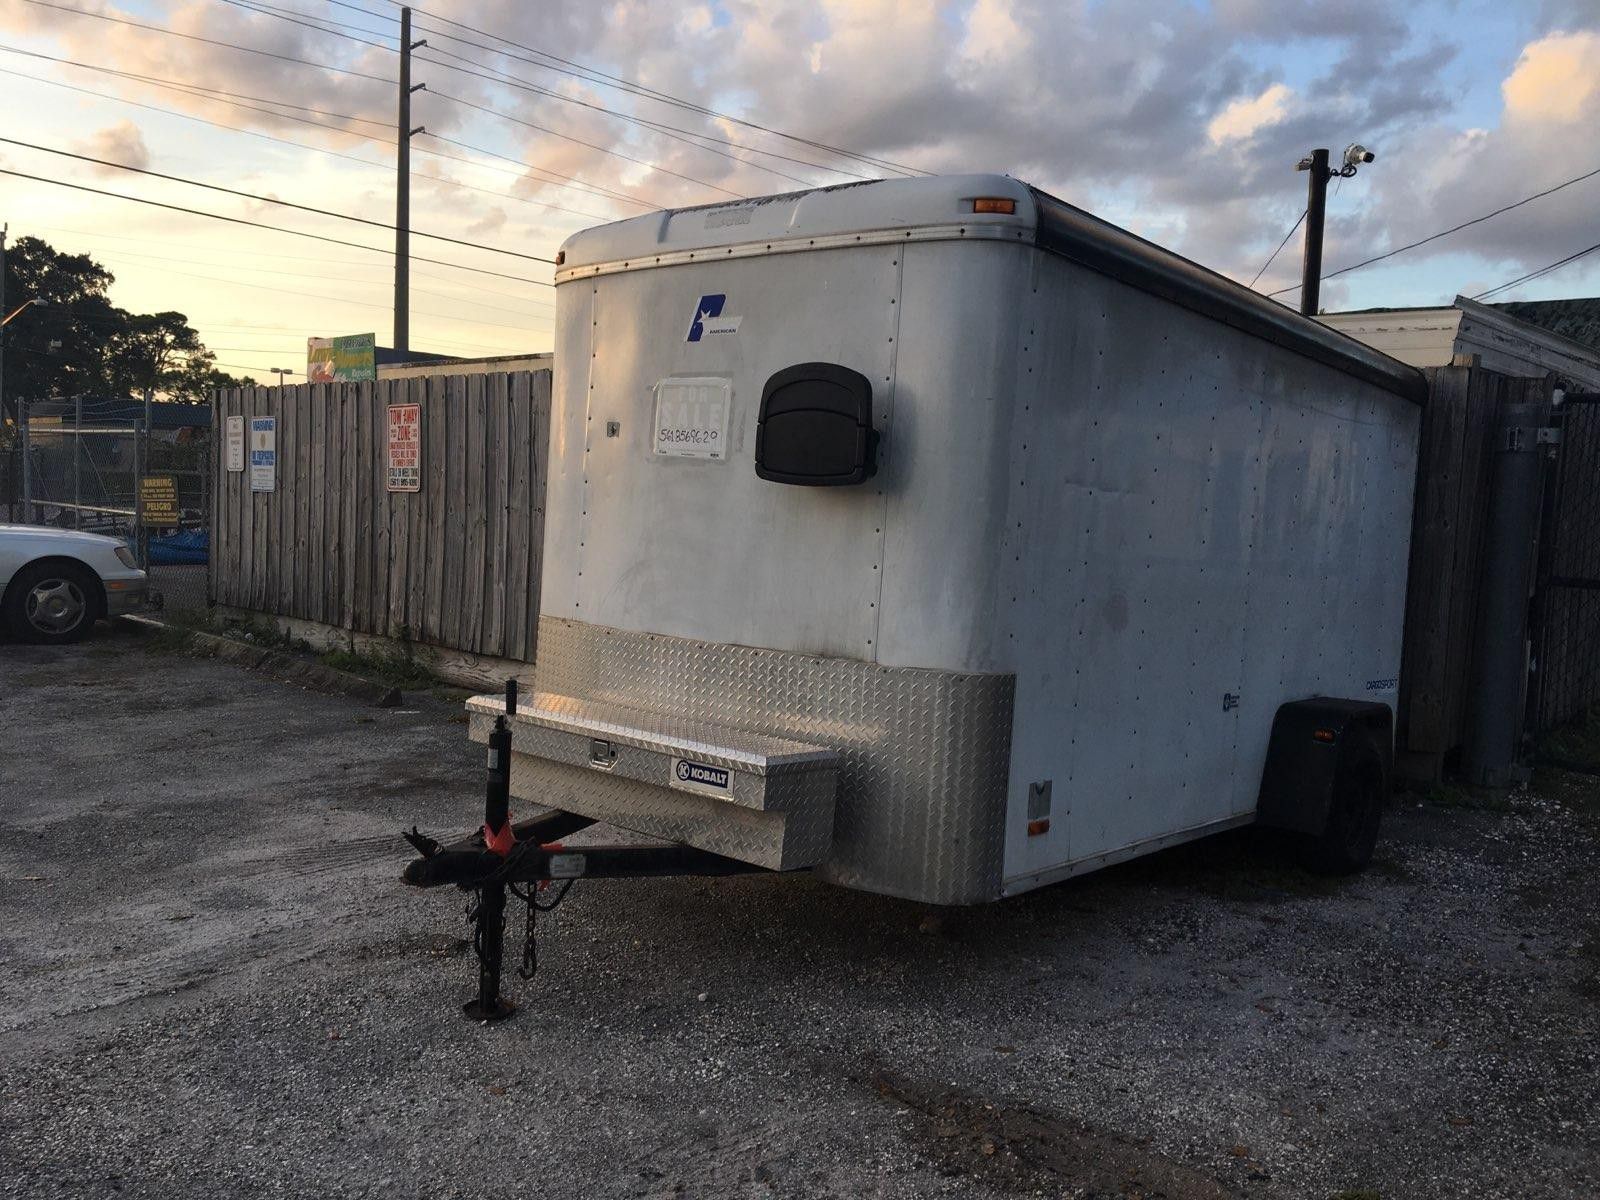 Trailer for sale!!